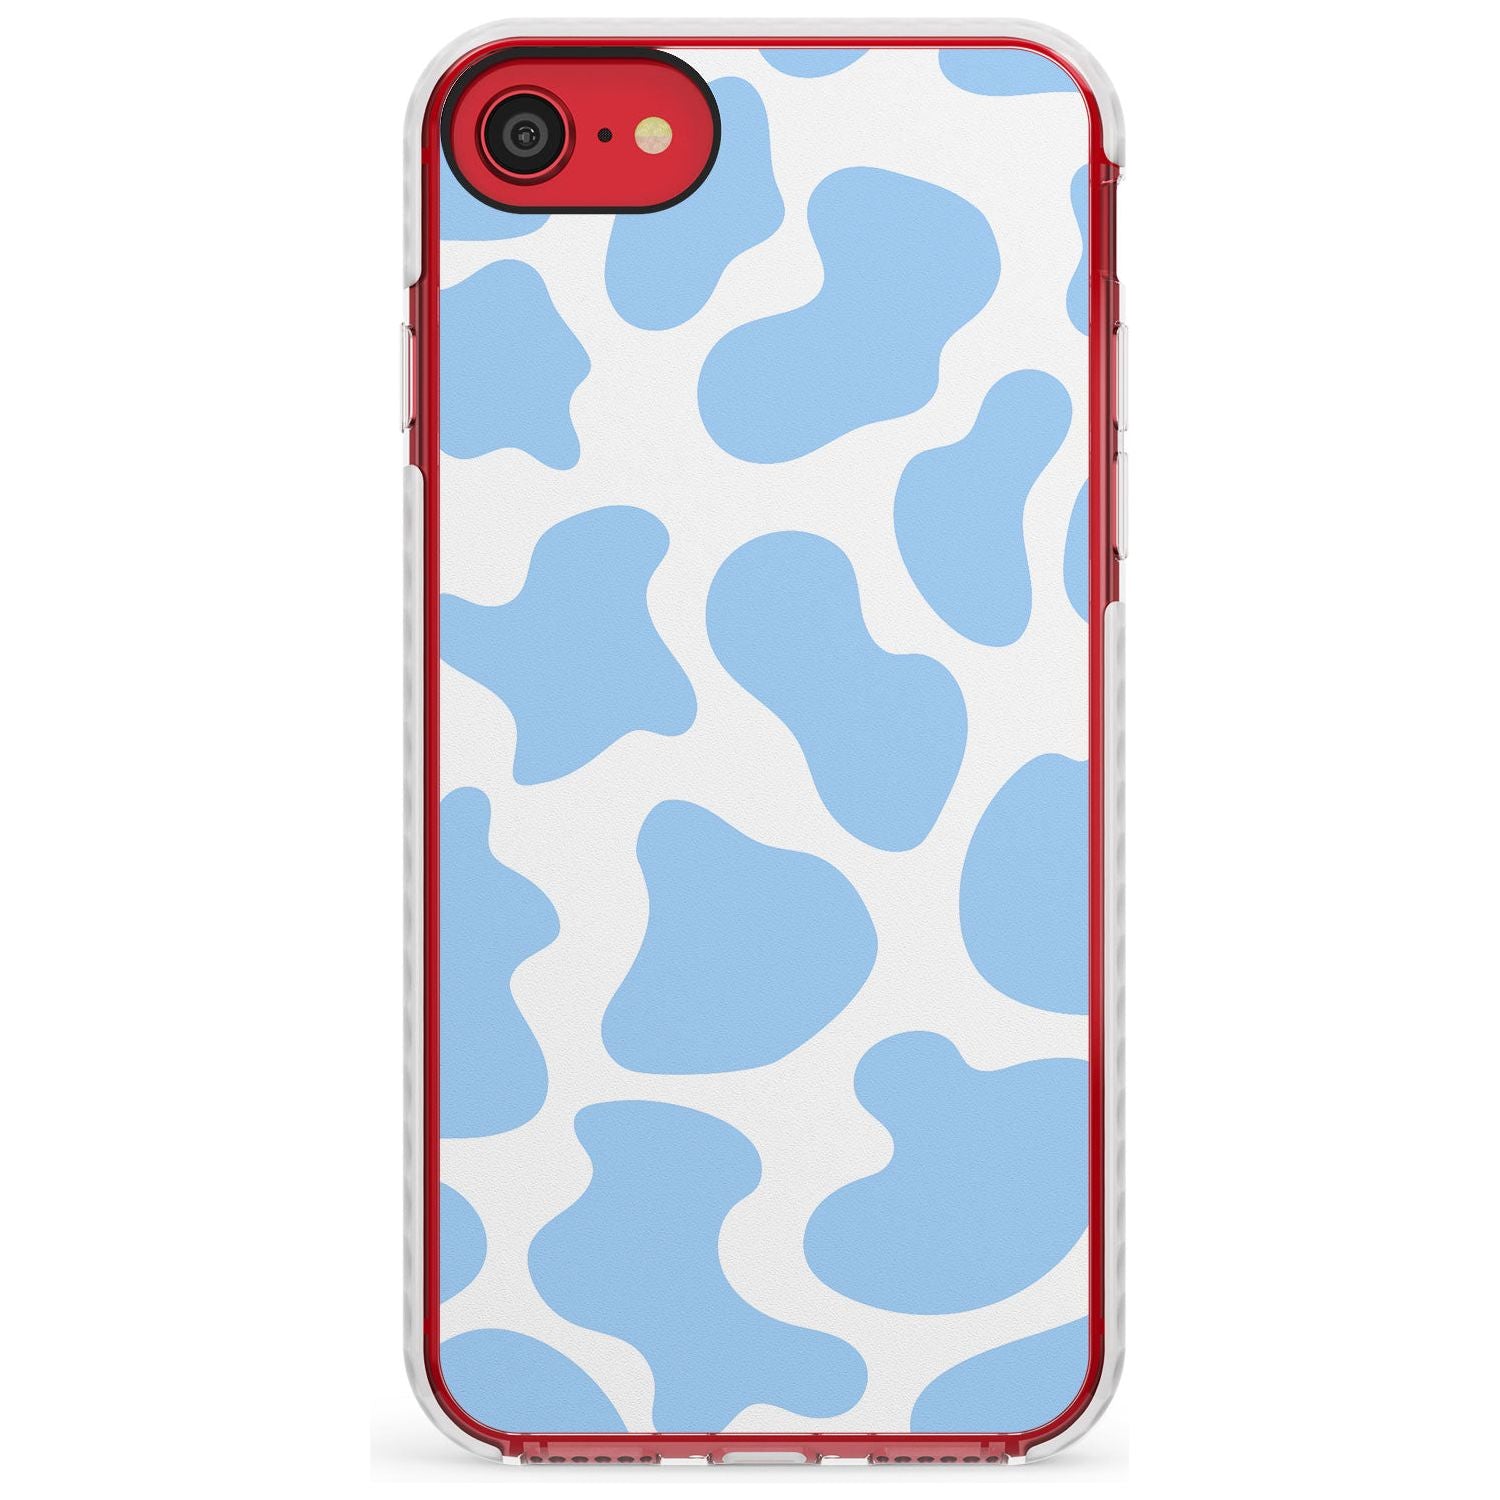 Blue and White Cow Print Impact Phone Case for iPhone SE 8 7 Plus